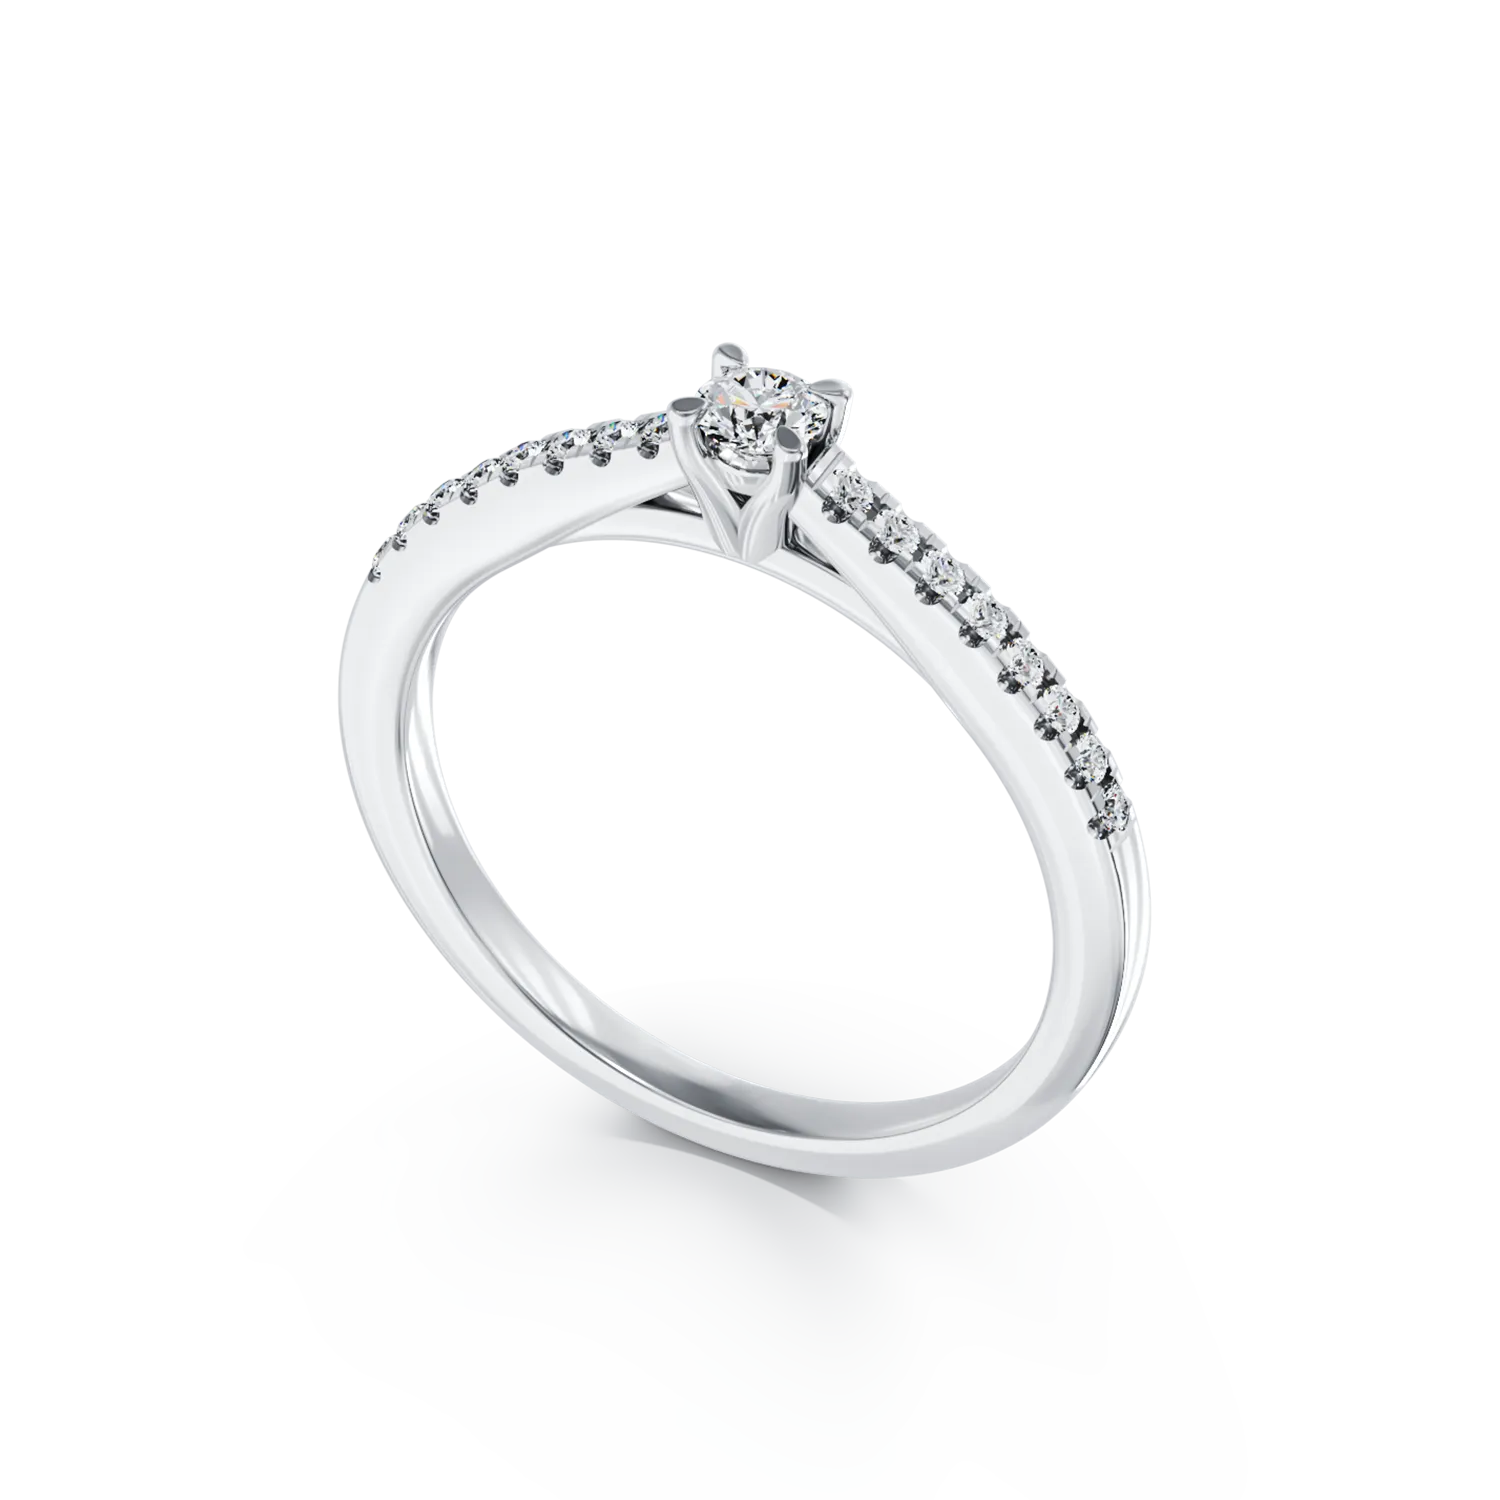 18K white gold engagement ring with 0.2ct diamond and 0.19ct diamonds